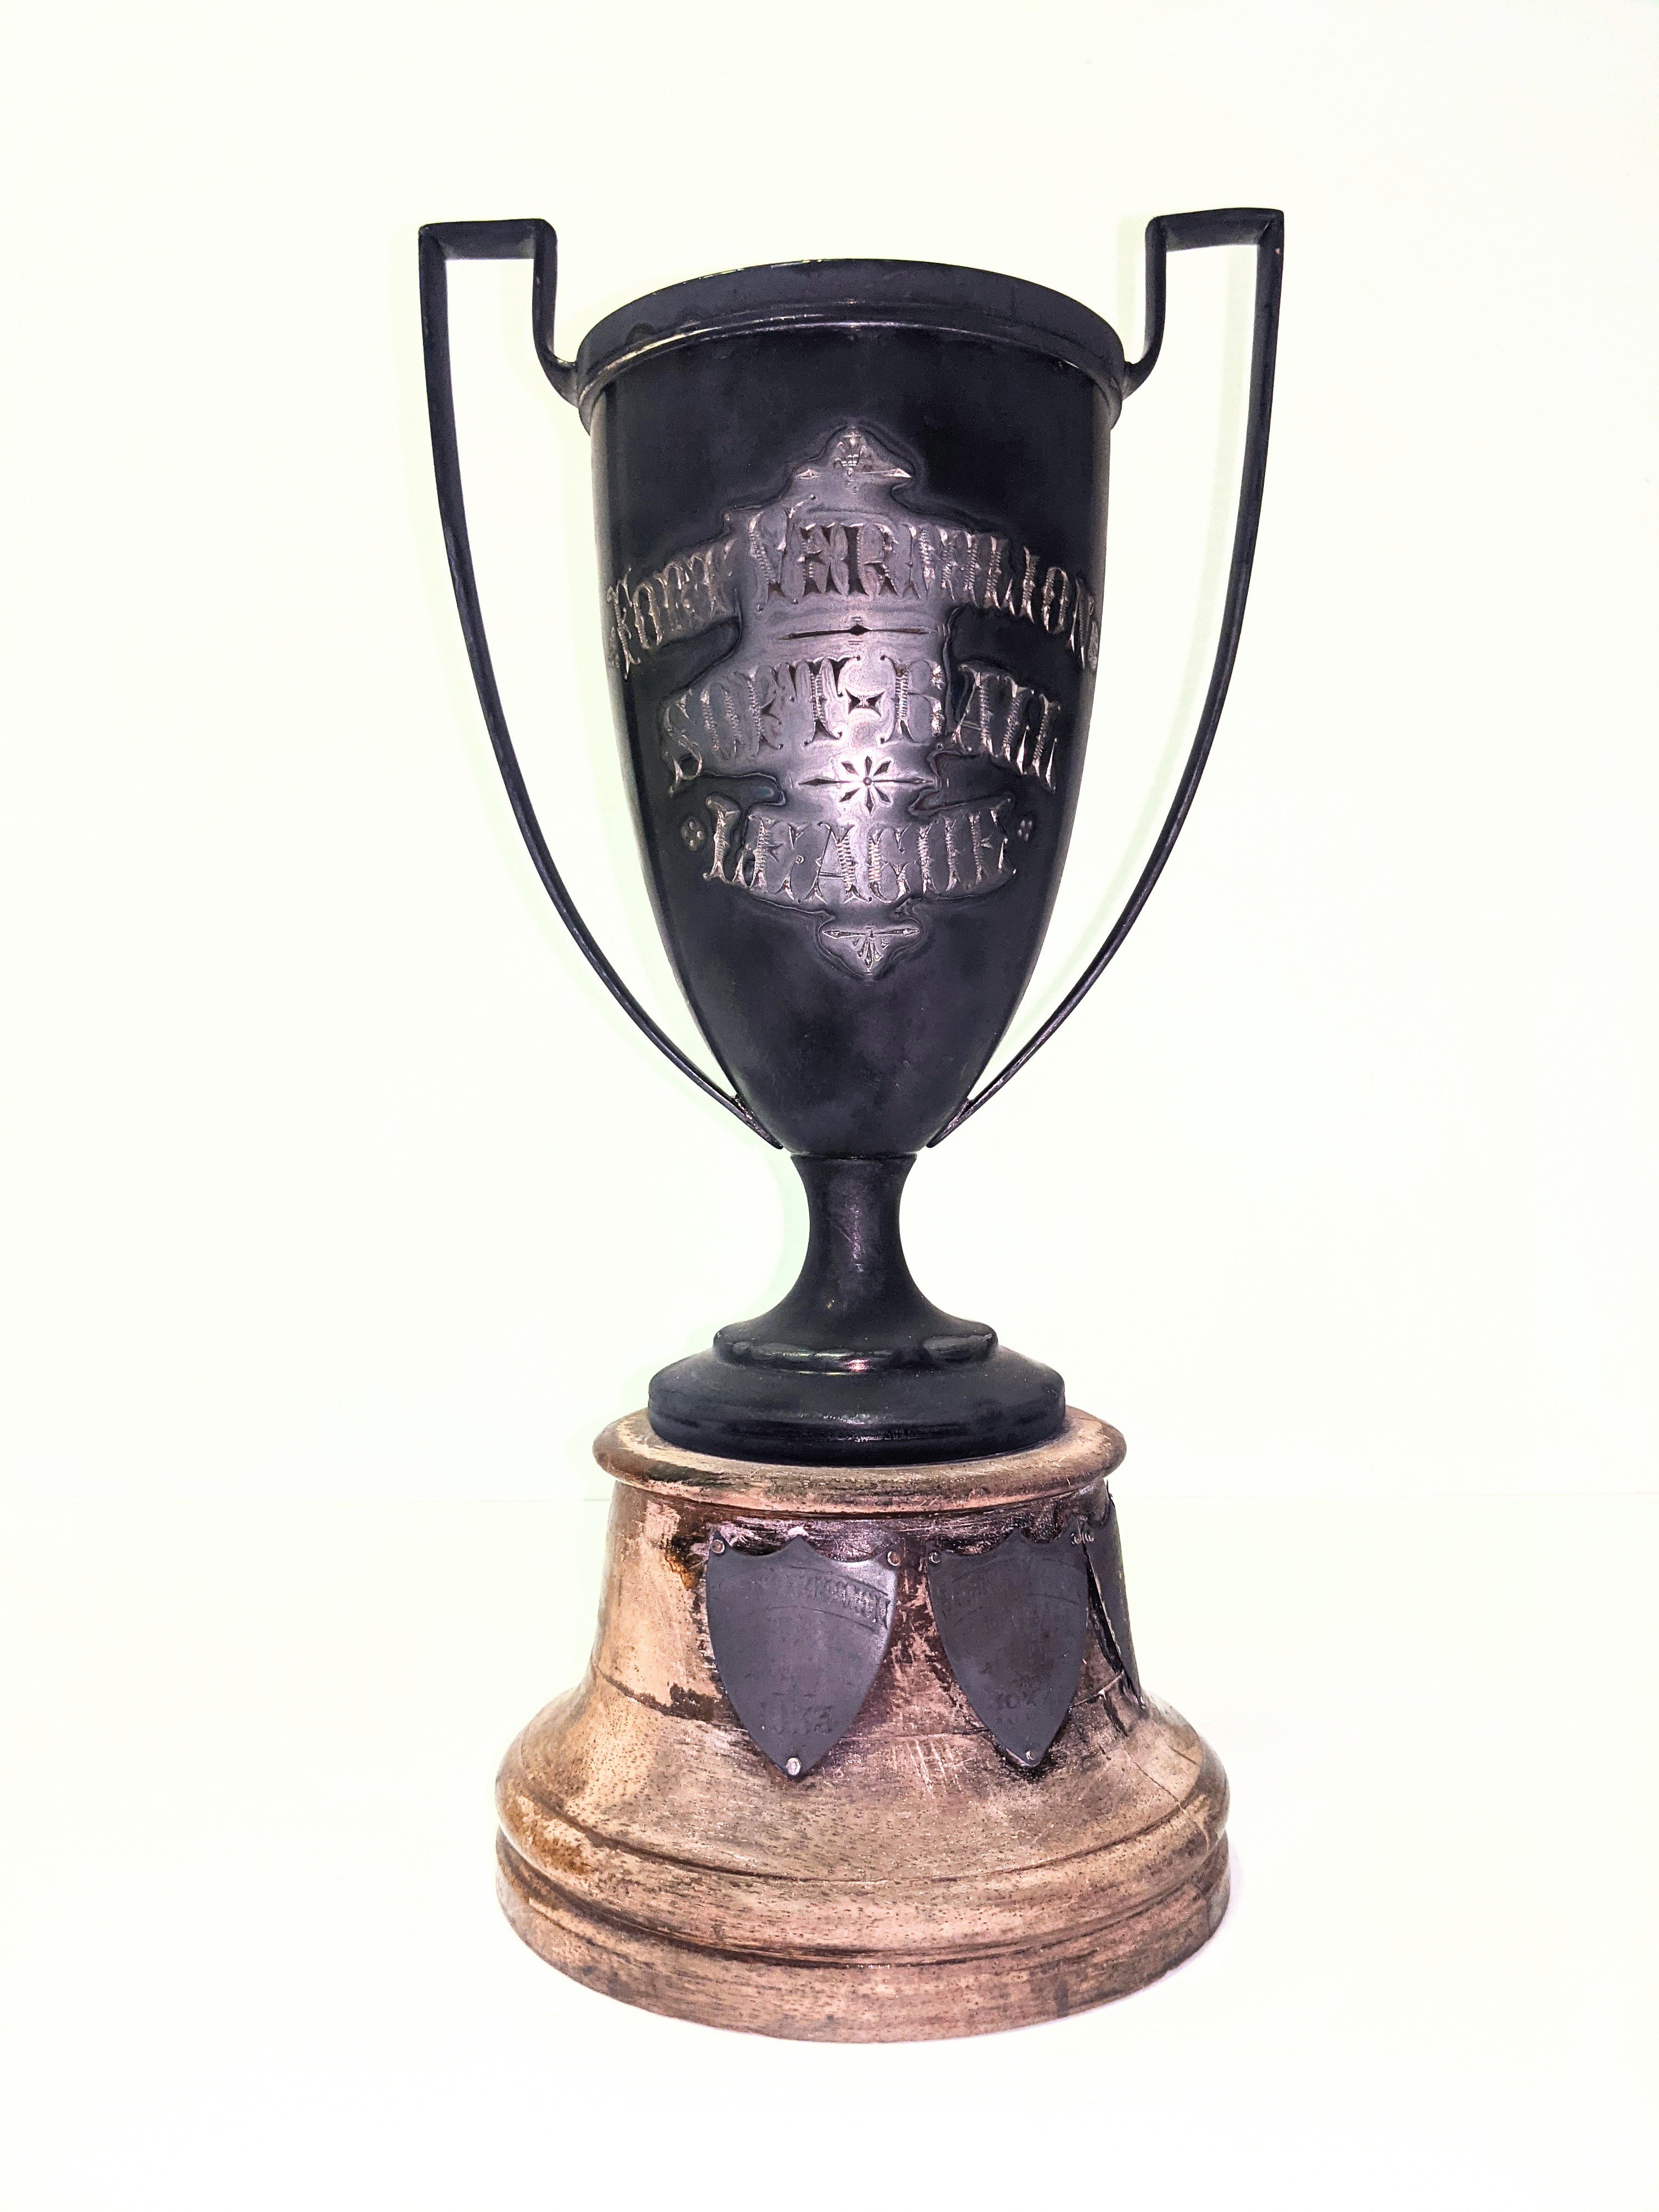 This is a sterling silver trophy (that badly needs polishing) for the "Fort Vermilion Soft Ball League". The 3 crests at the bottom detail "Fort Vermilion Softball Club" as champions in 1933 and "Stoney Point Softball Club" as champions in 1934 + 1935. The original price of the trophy is noted on the bottom as $15.25

15/02/2021
2000.18.09 / Jones, Art
